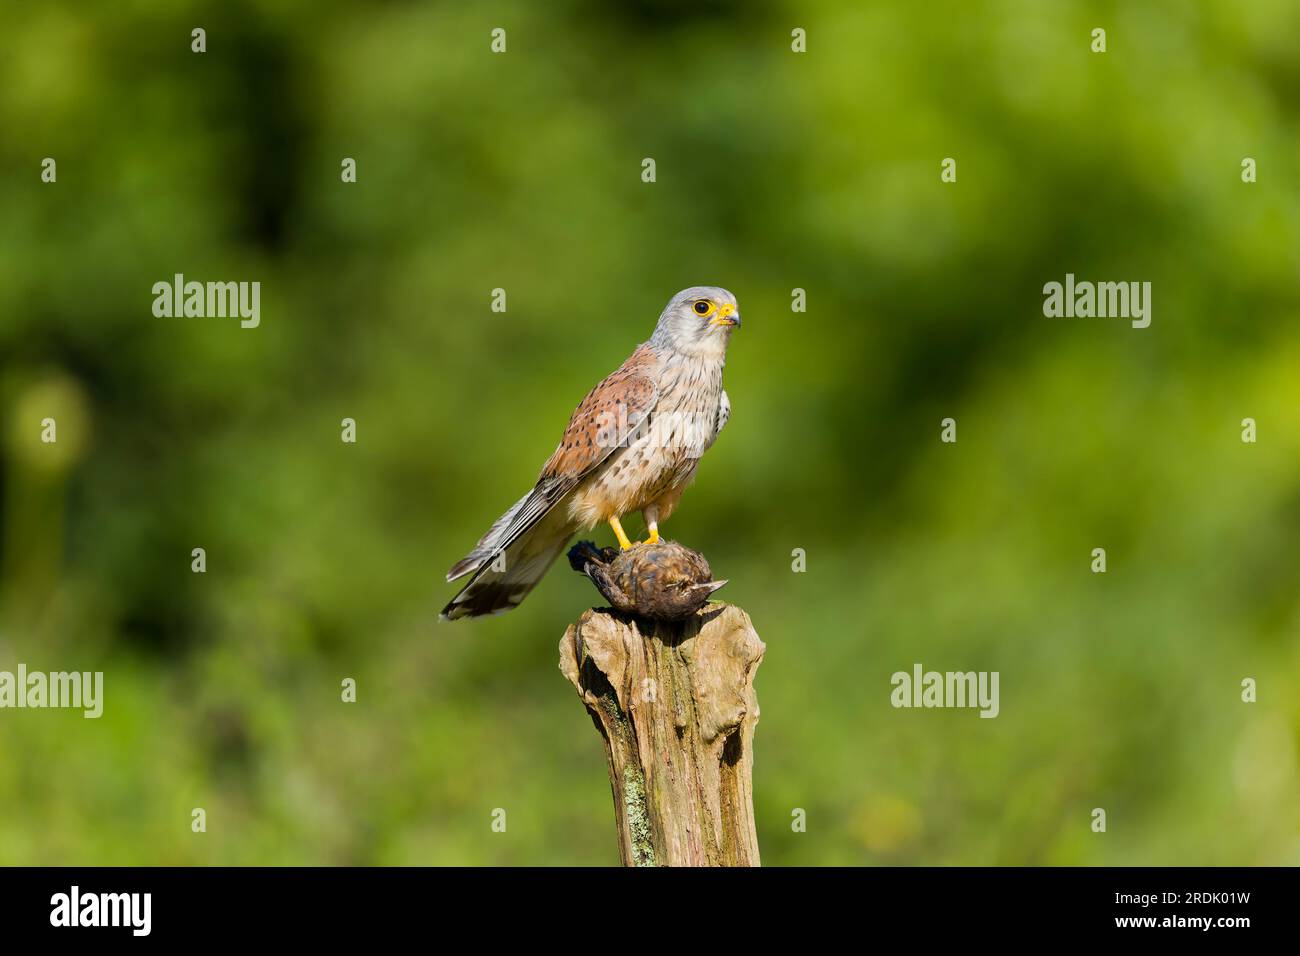 Common kestrel Falco tinnunculus, adult male perched on post with Common blackbird Turdus merula, juvenile prey in talons, Suffolk, England, July Stock Photo